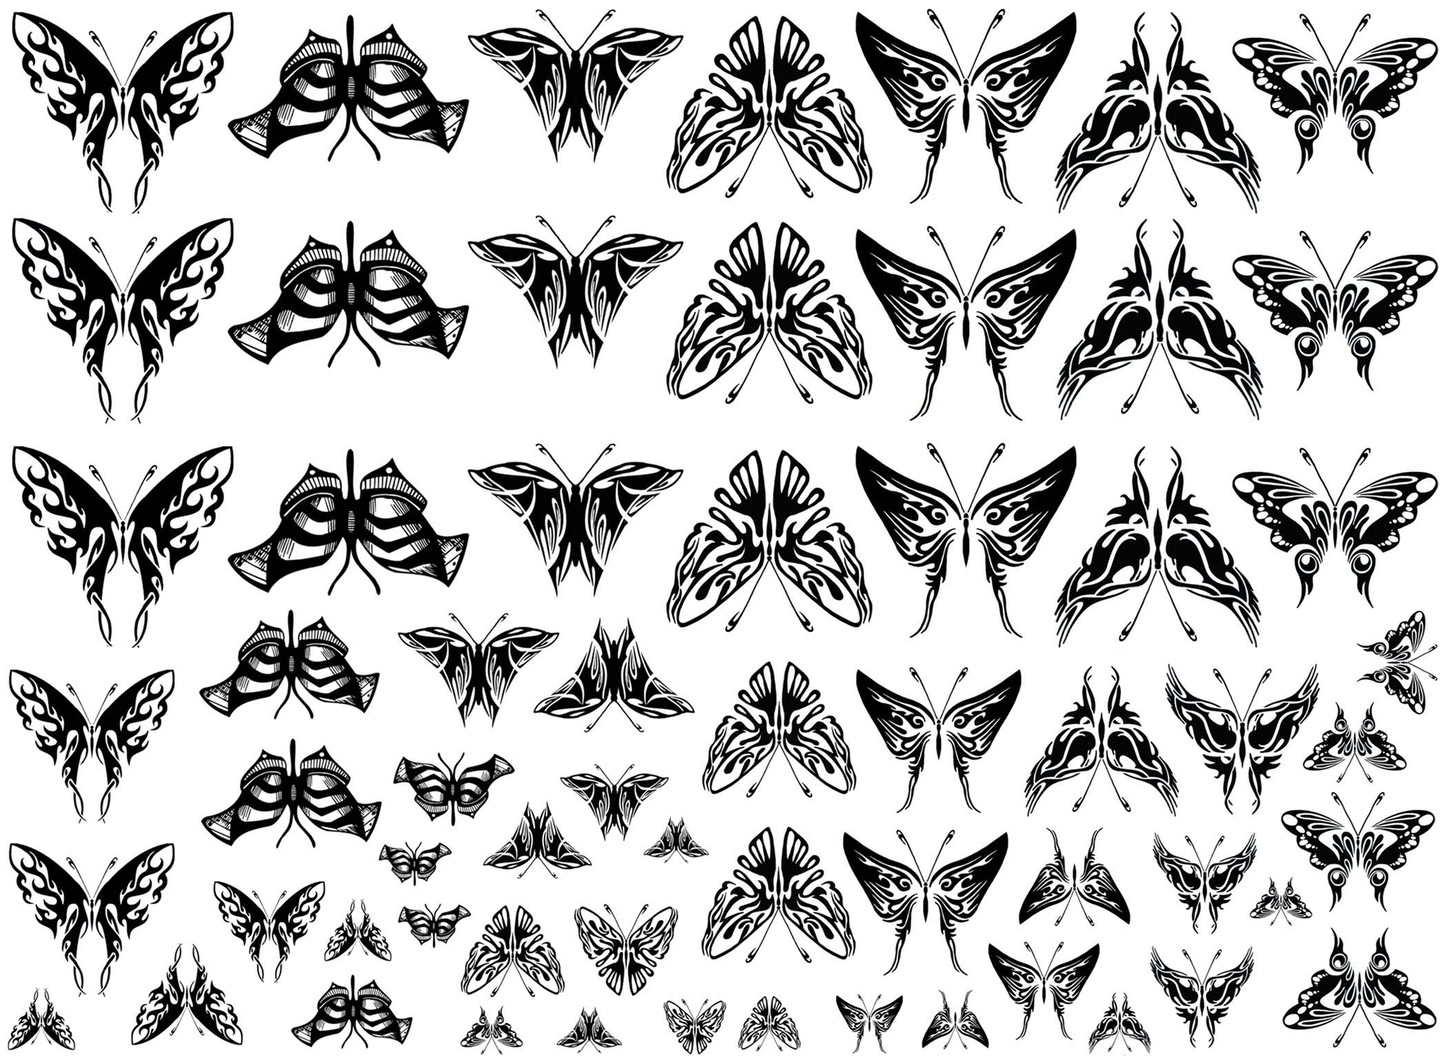 Bold Butterflies 62 Pcs 1/4" to 1" Black Fused Glass Decals